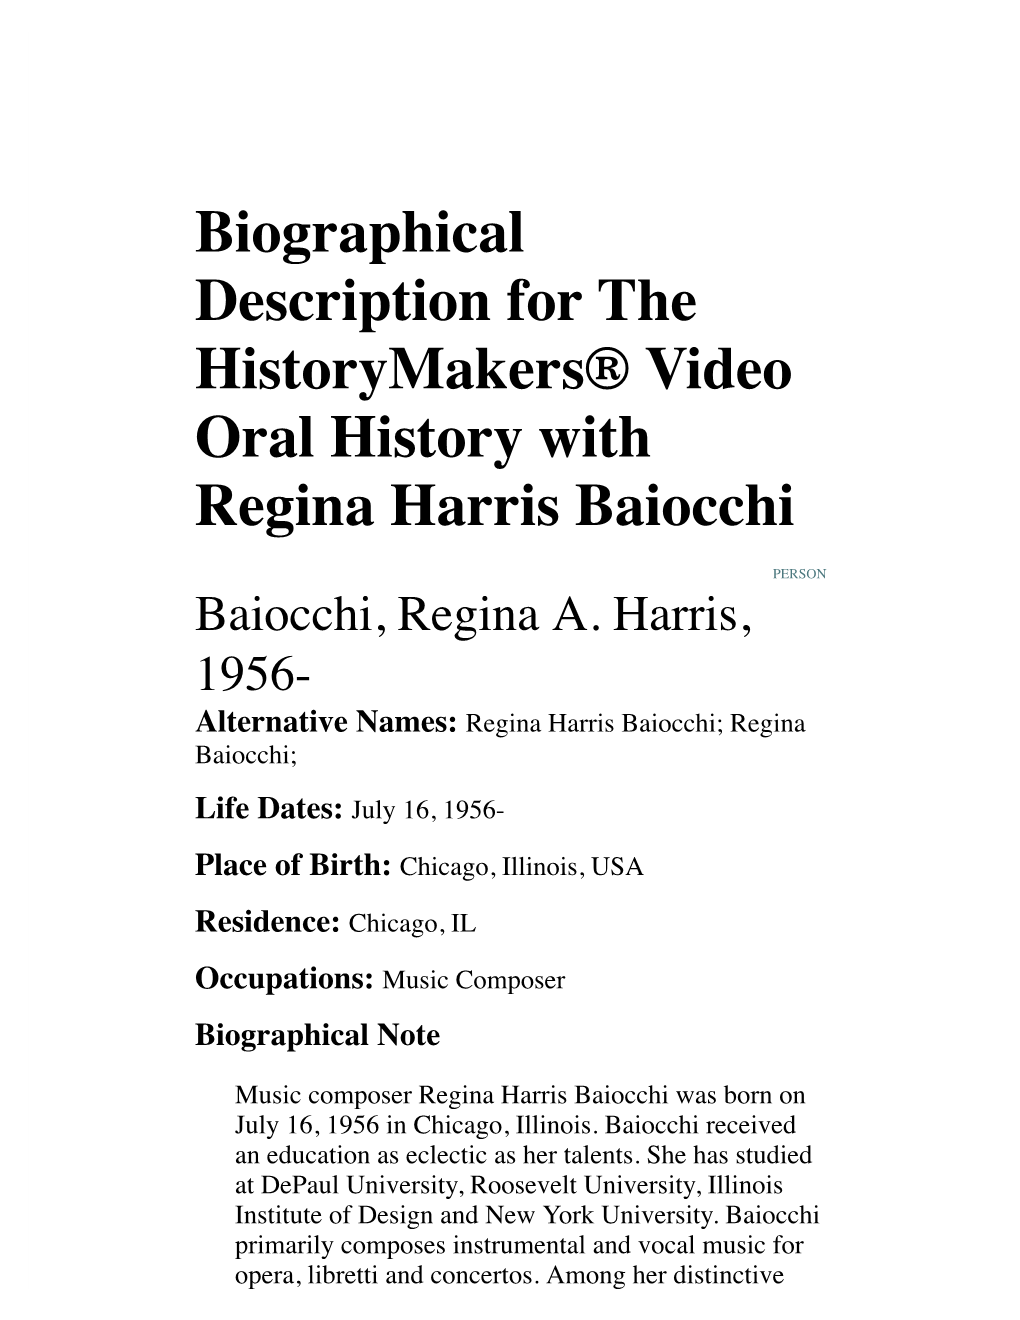 Biographical Description for the Historymakers® Video Oral History with Regina Harris Baiocchi